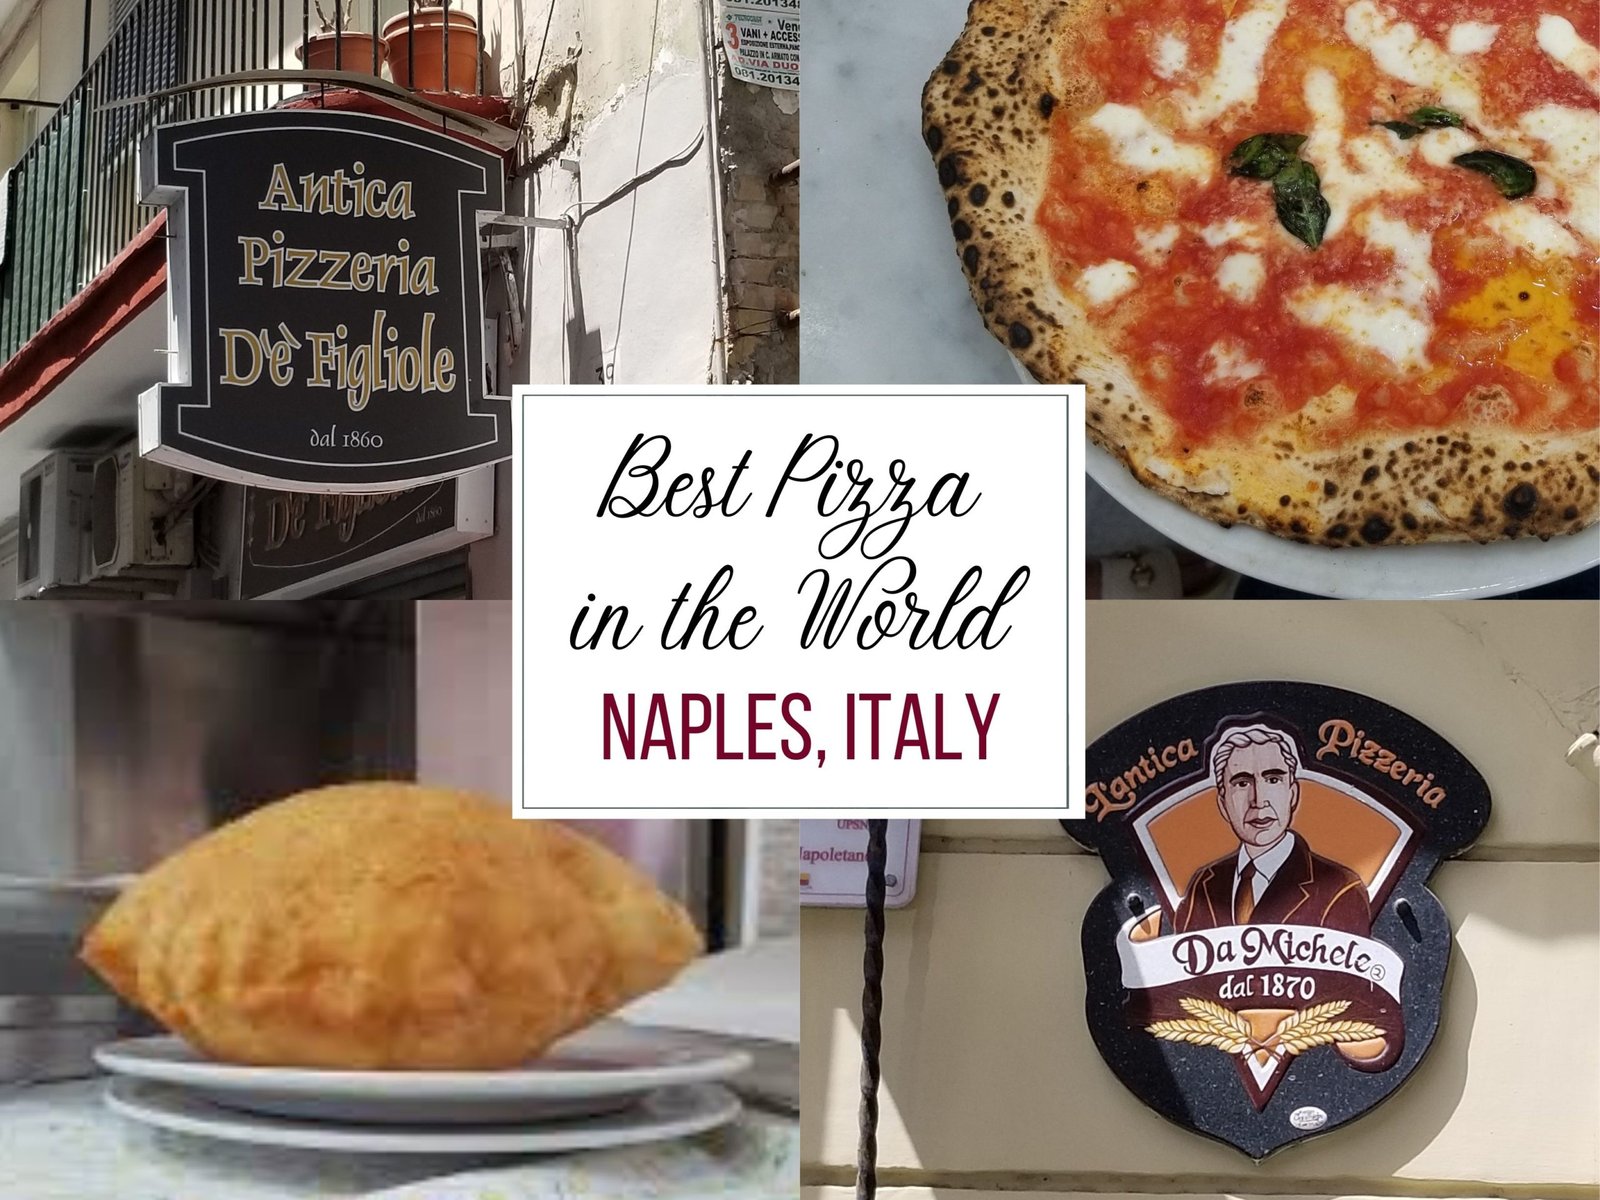 Best pizza in the world can be found in Naples, Italy. Our recommendations for pizza from ouritalianjourney.com, https://ouritalianjourney.com/best-pizza-in-world-naples/